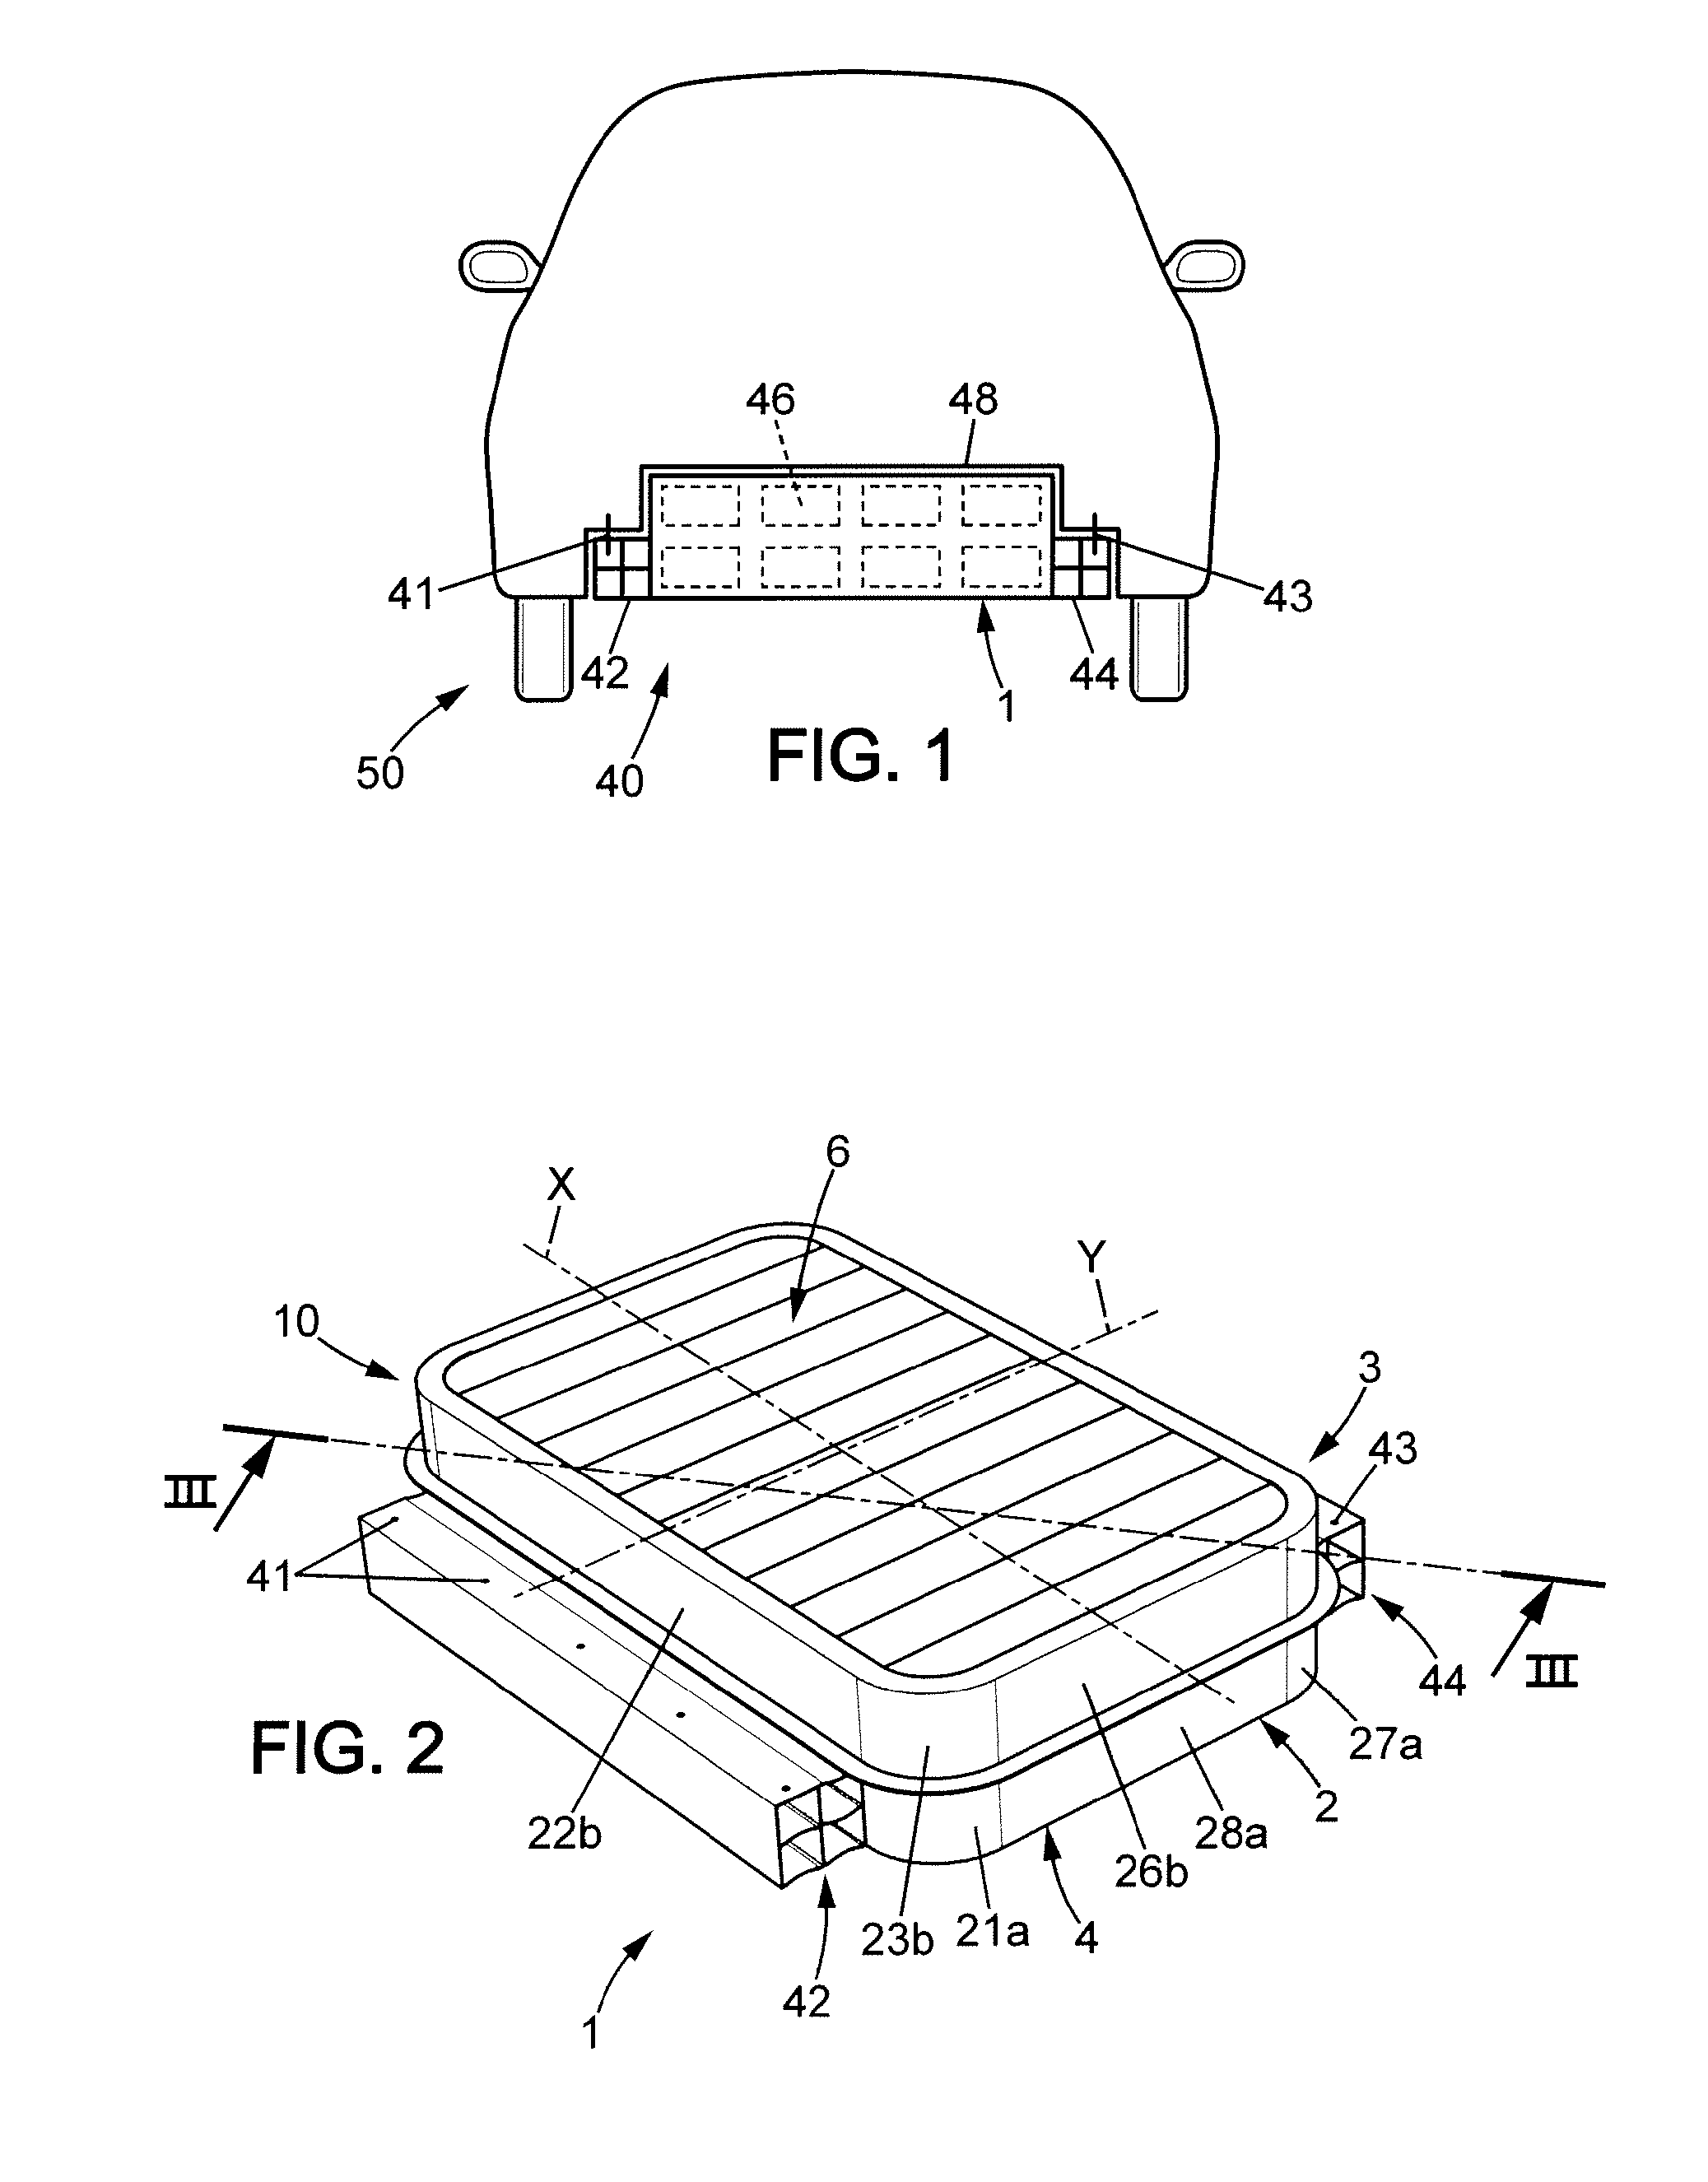 Battery Tray for Vehicle and Method for Producing the Battery Tray